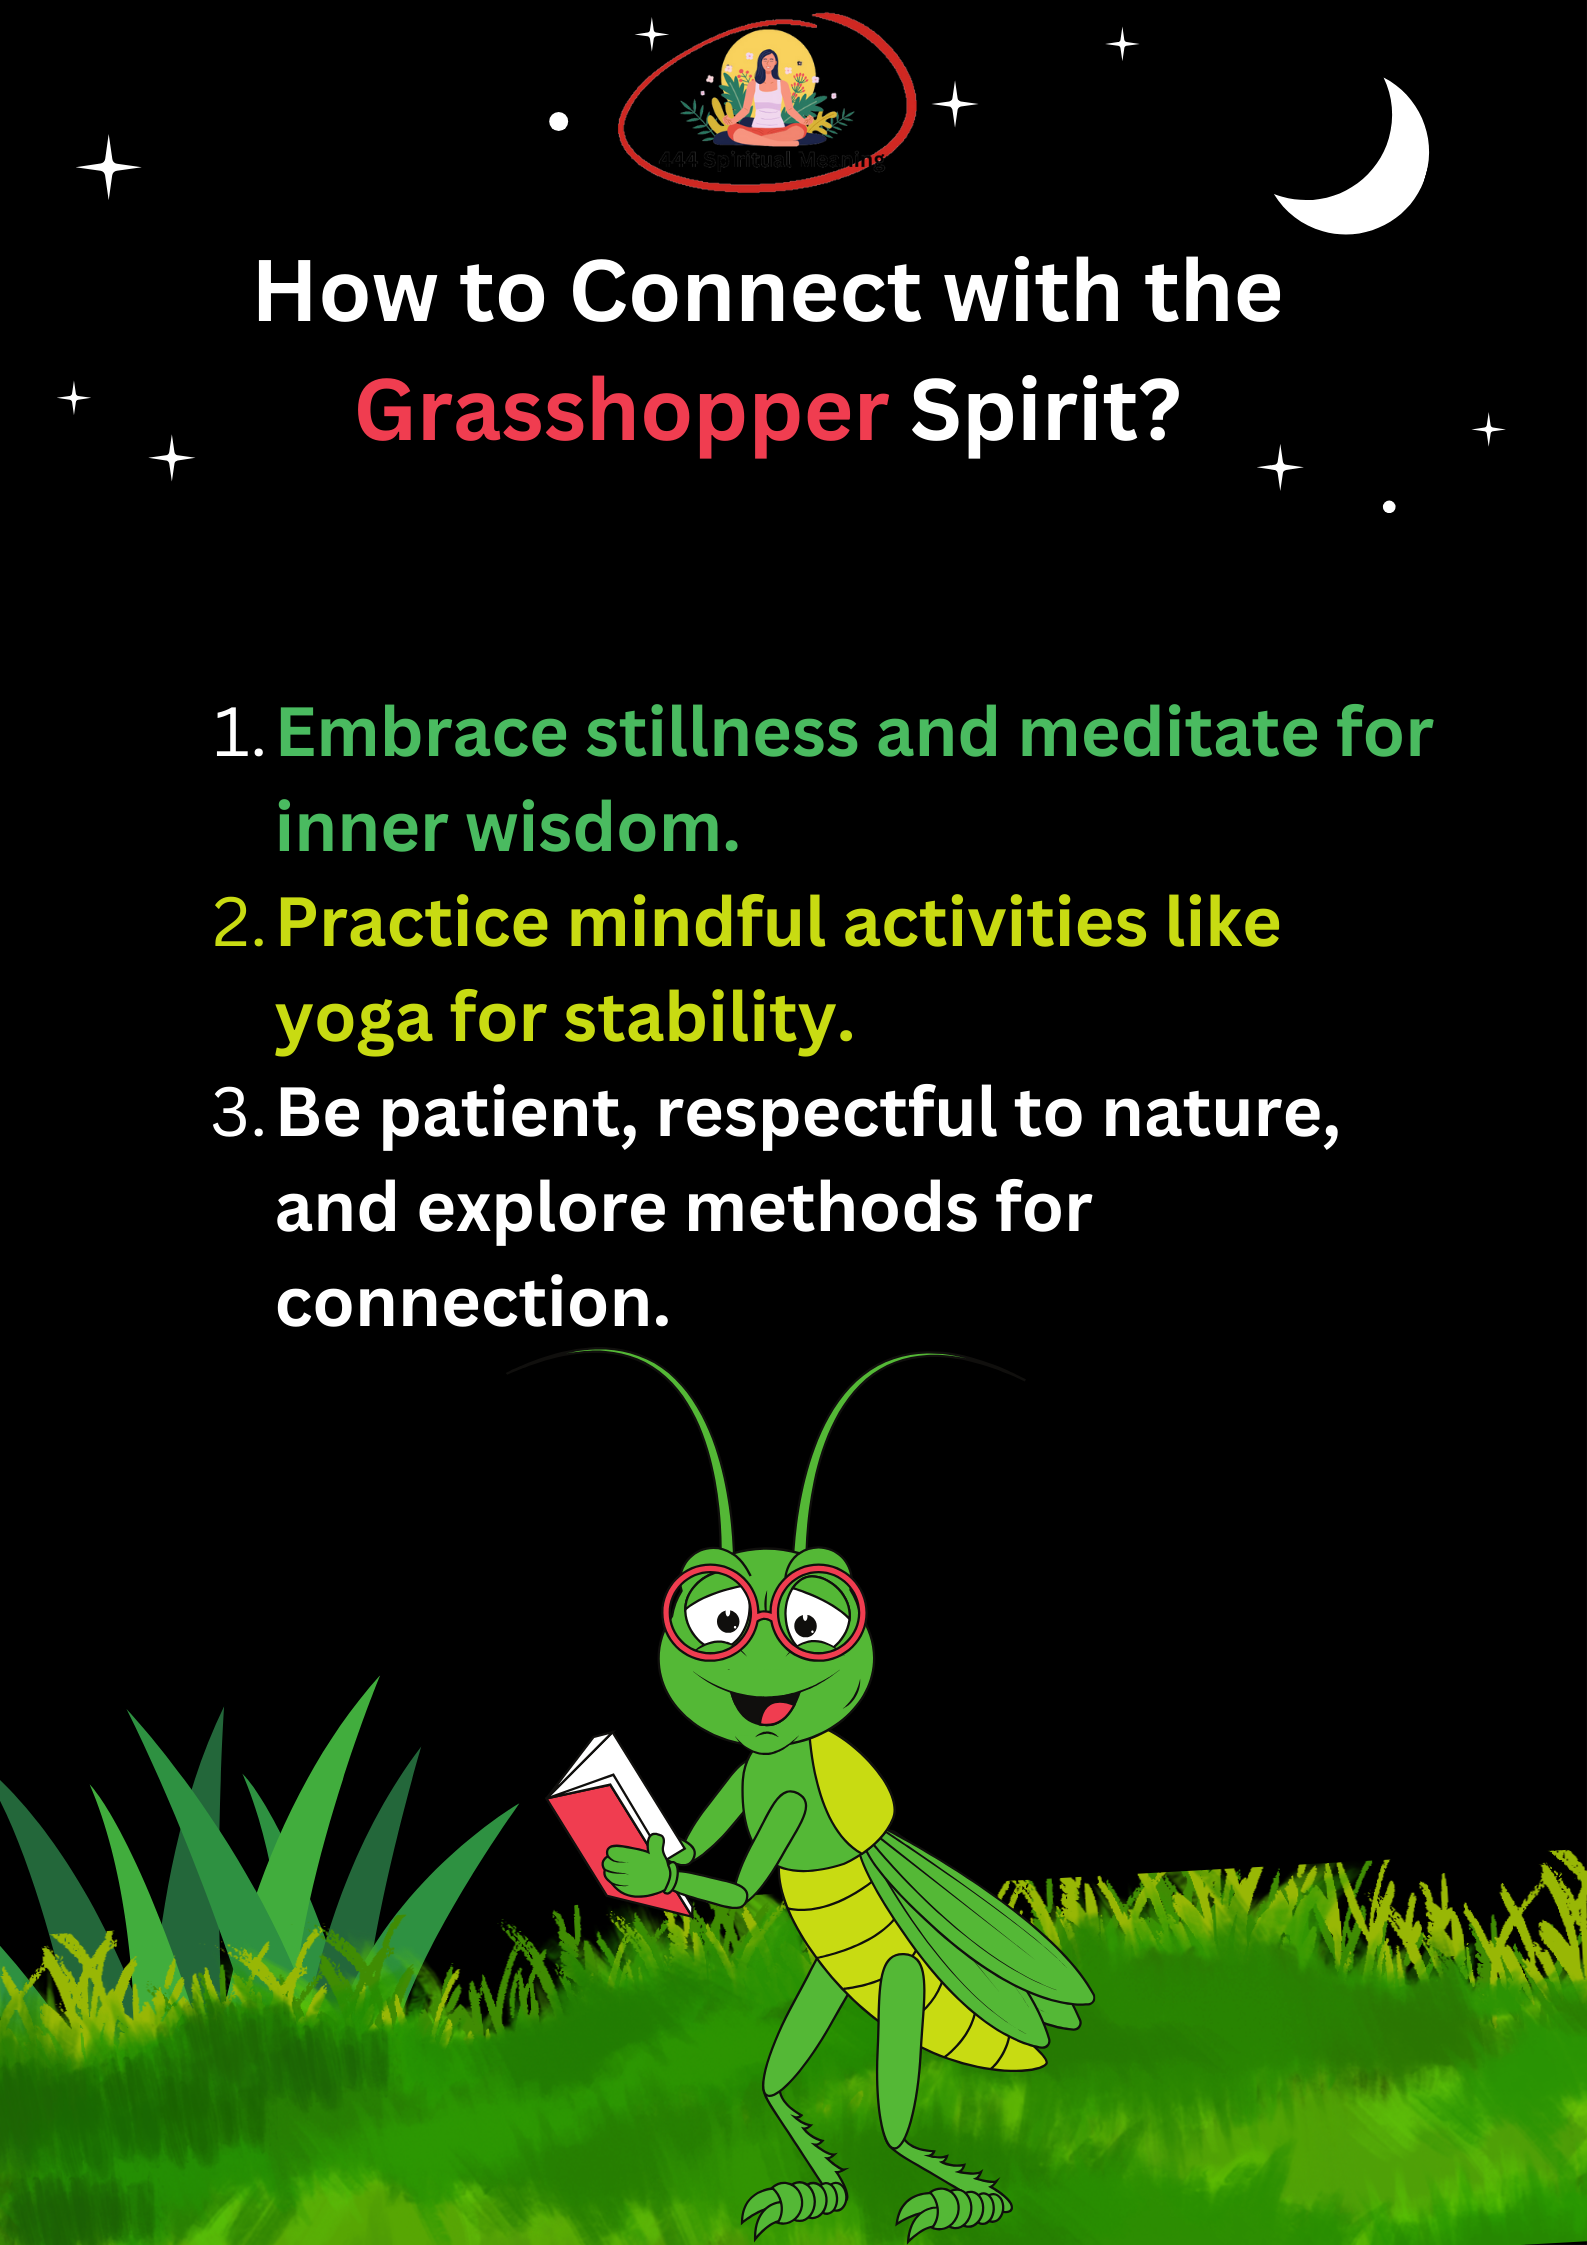 How to Connect with the Grasshopper Spirit?